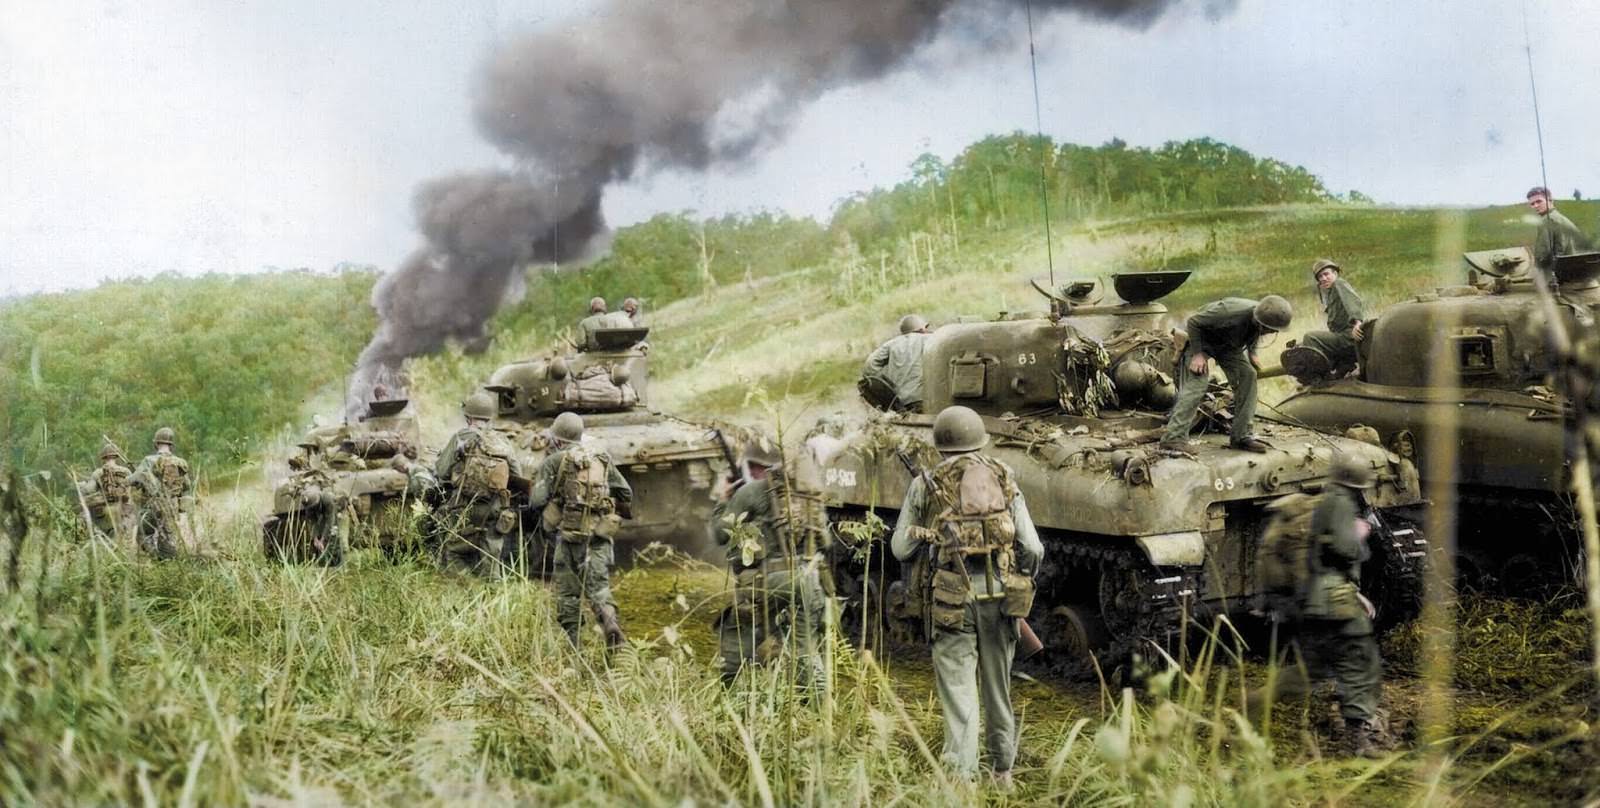 Troops and their tanks in New Guinea in April 1944.